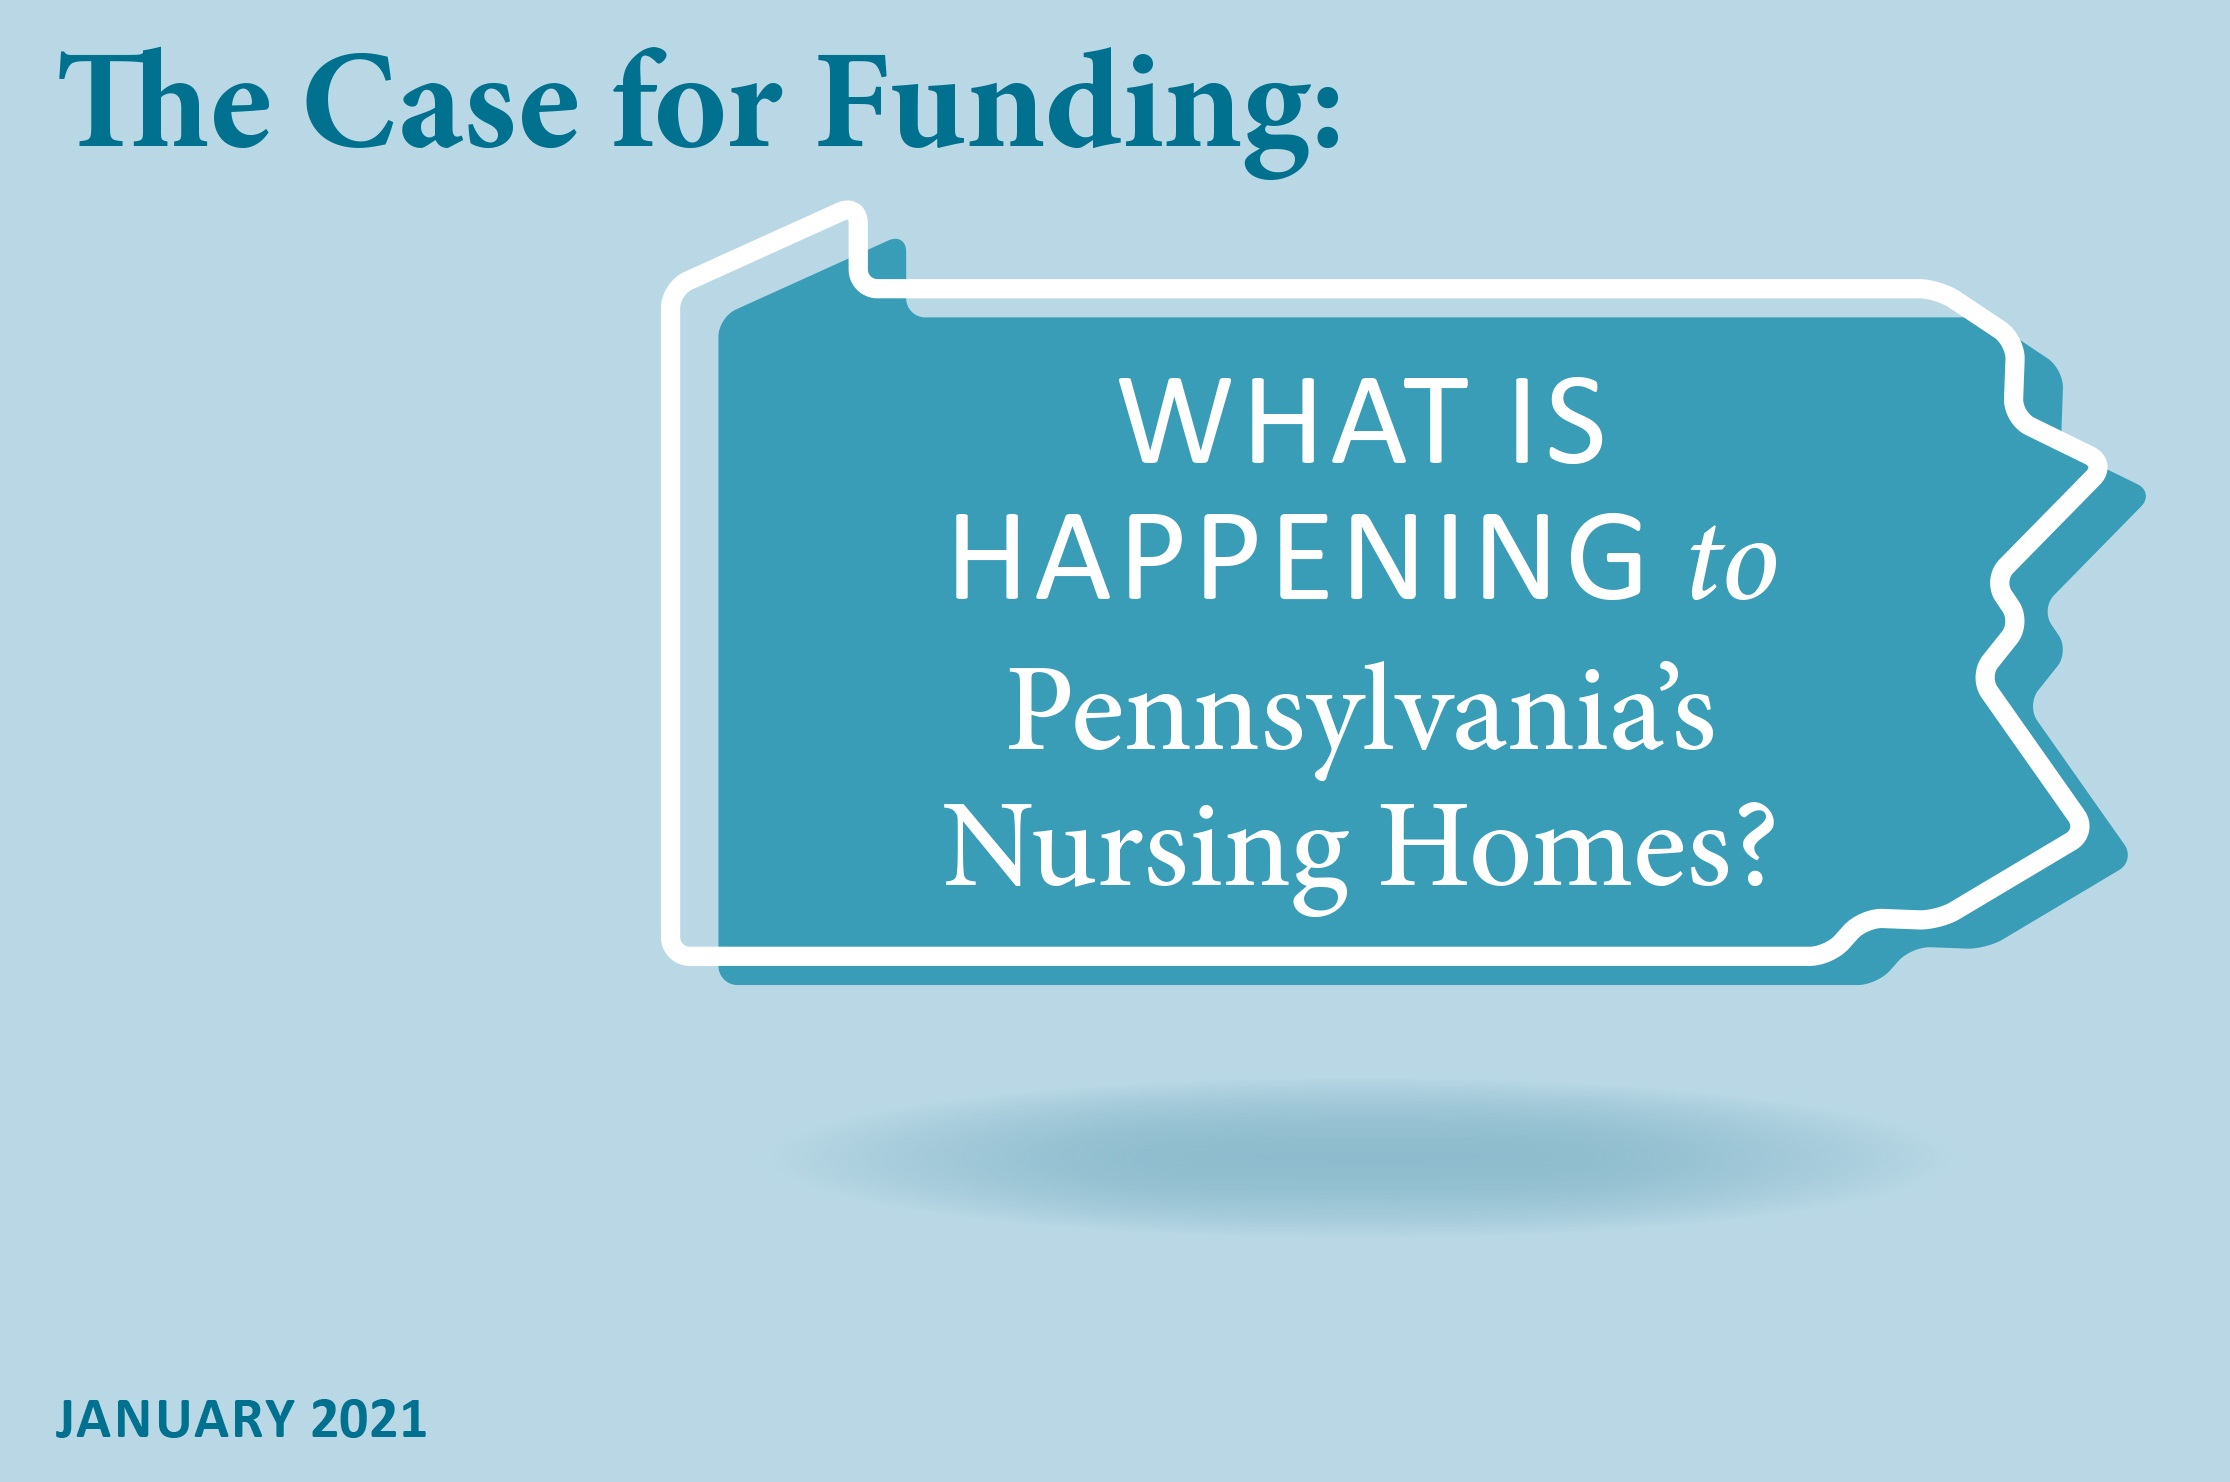 The Case for Funding: What is happening to Pennsylvania's nursing homes? graphic text